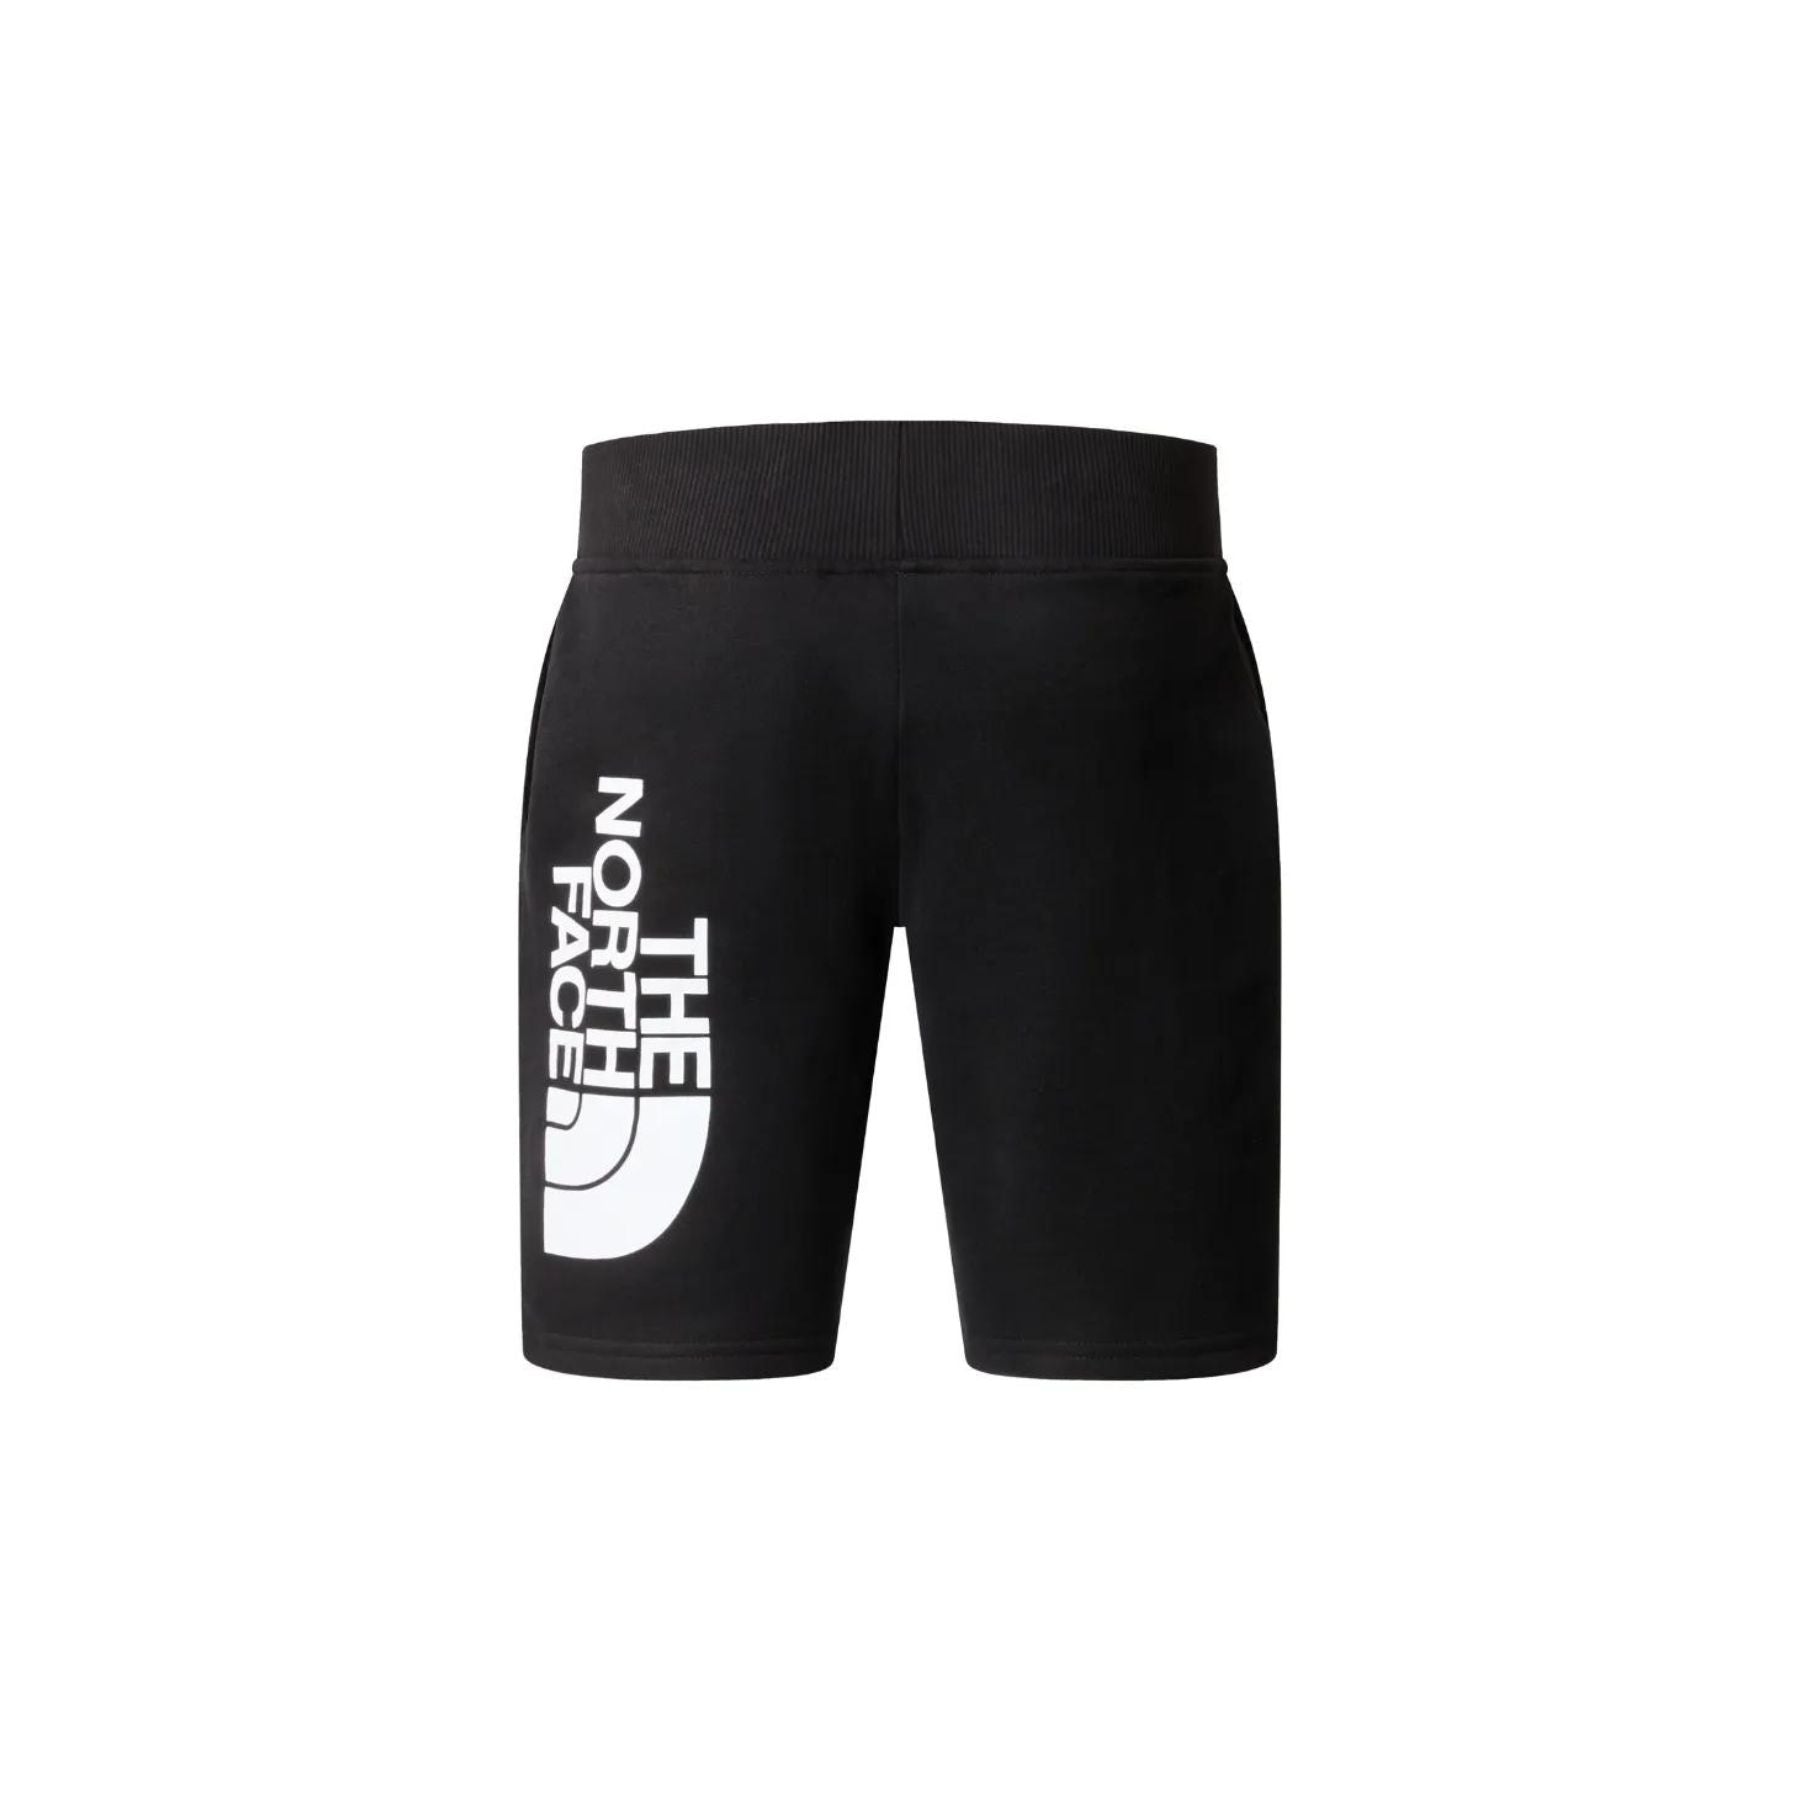 THE NORTH FACE COTTON SHORTS BOY